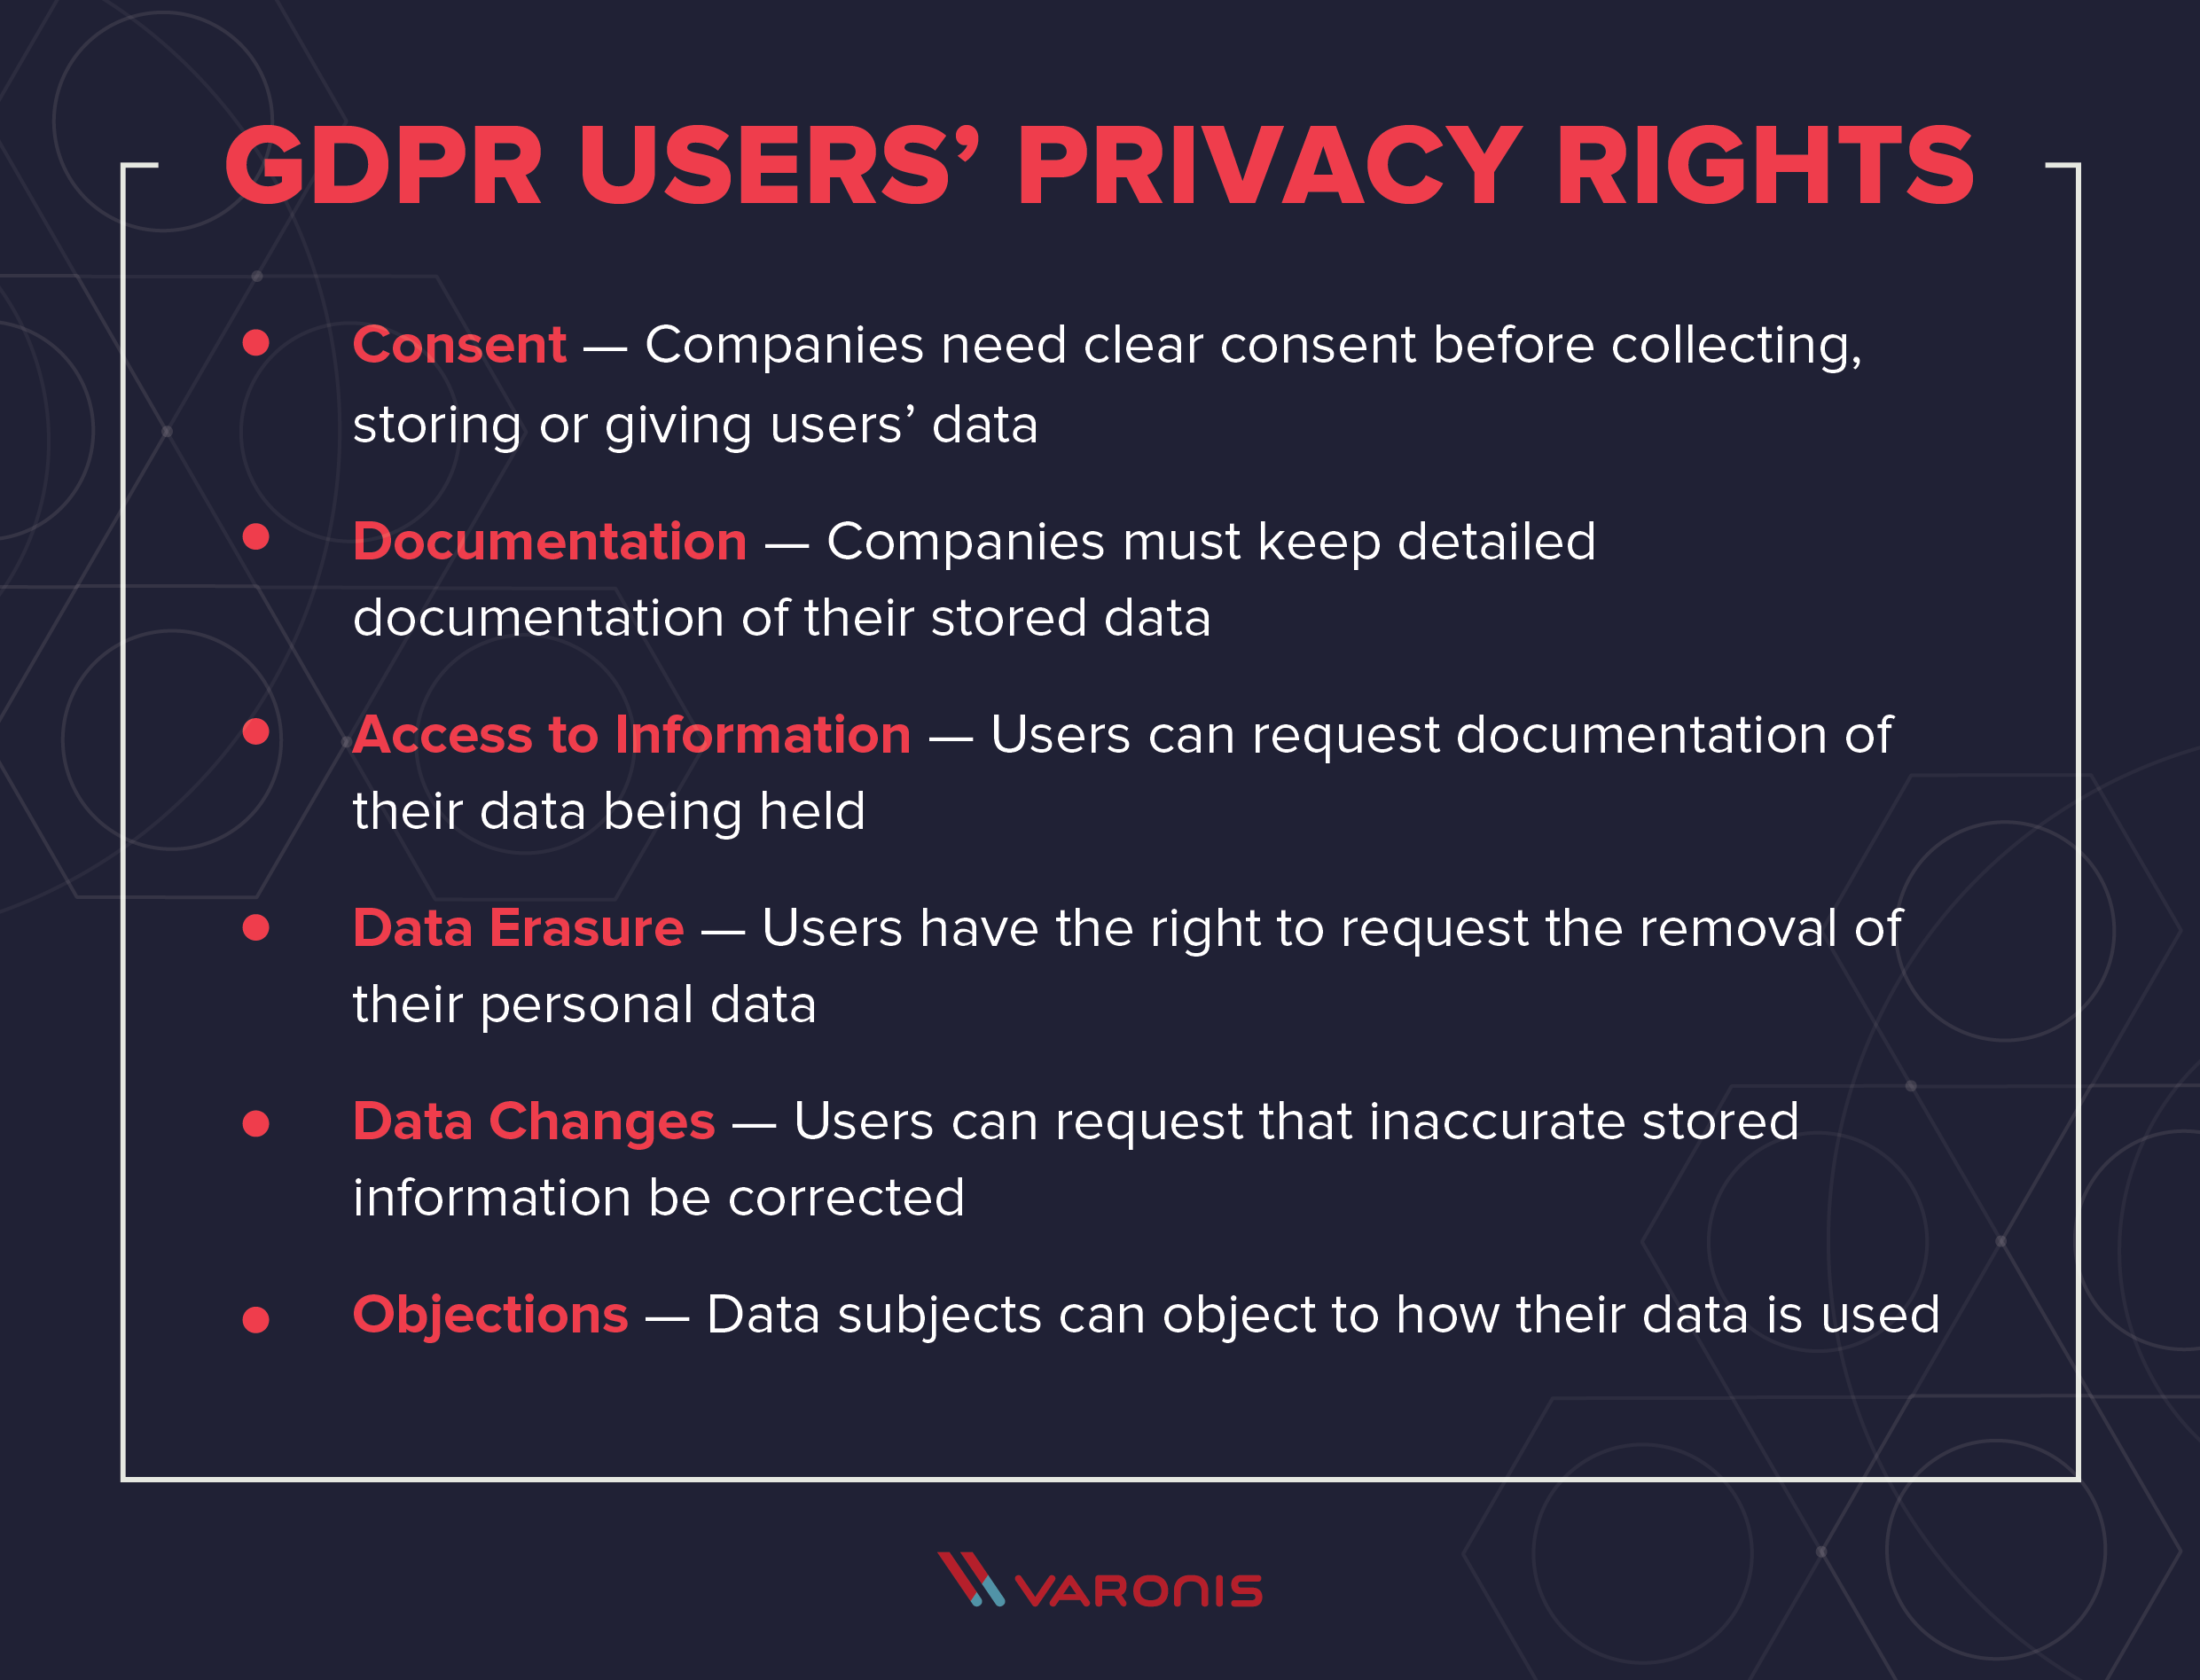 Title: GDPR Users’ Privacy Rights Consent — Companies need clear consent before collecting, storing or giving users’ data Documentation — Companies must keep detailed documentation of their stored data Access to Information — Users can request documentation of their data being held Data Erasure — Users have the right to request the removal of their personal data Data Changes — Users can request that inaccurate stored information be corrected Objections — Data subjects can object to how their data is used